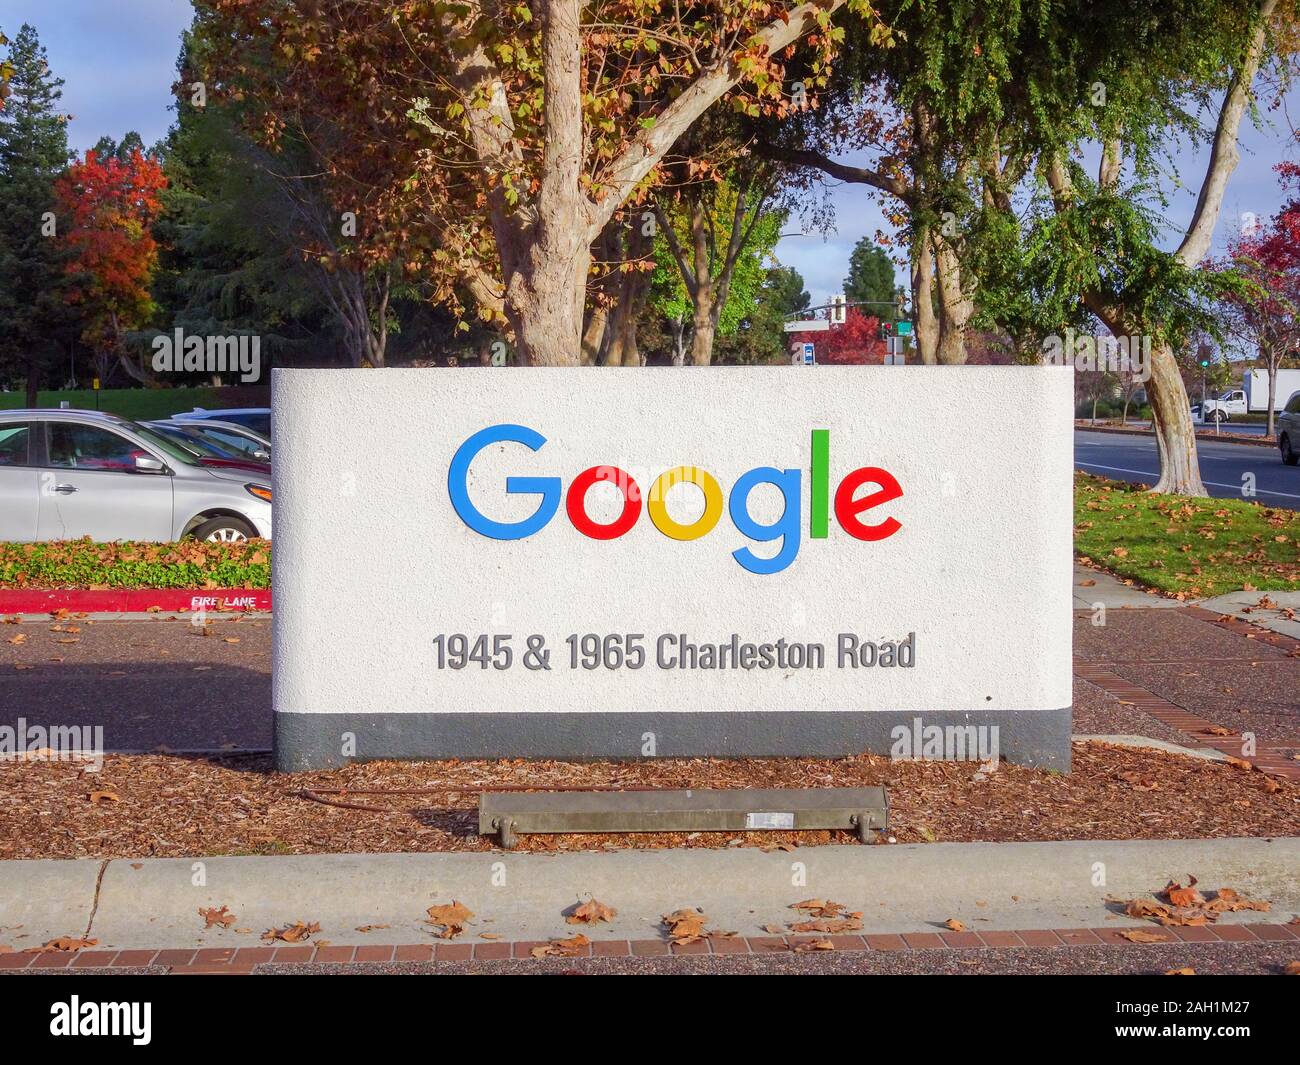 Google logo signage trees with red leaves in fall season on 1945 charleston road, Mountain view, california, USA, Dec 2019 Stock Photo